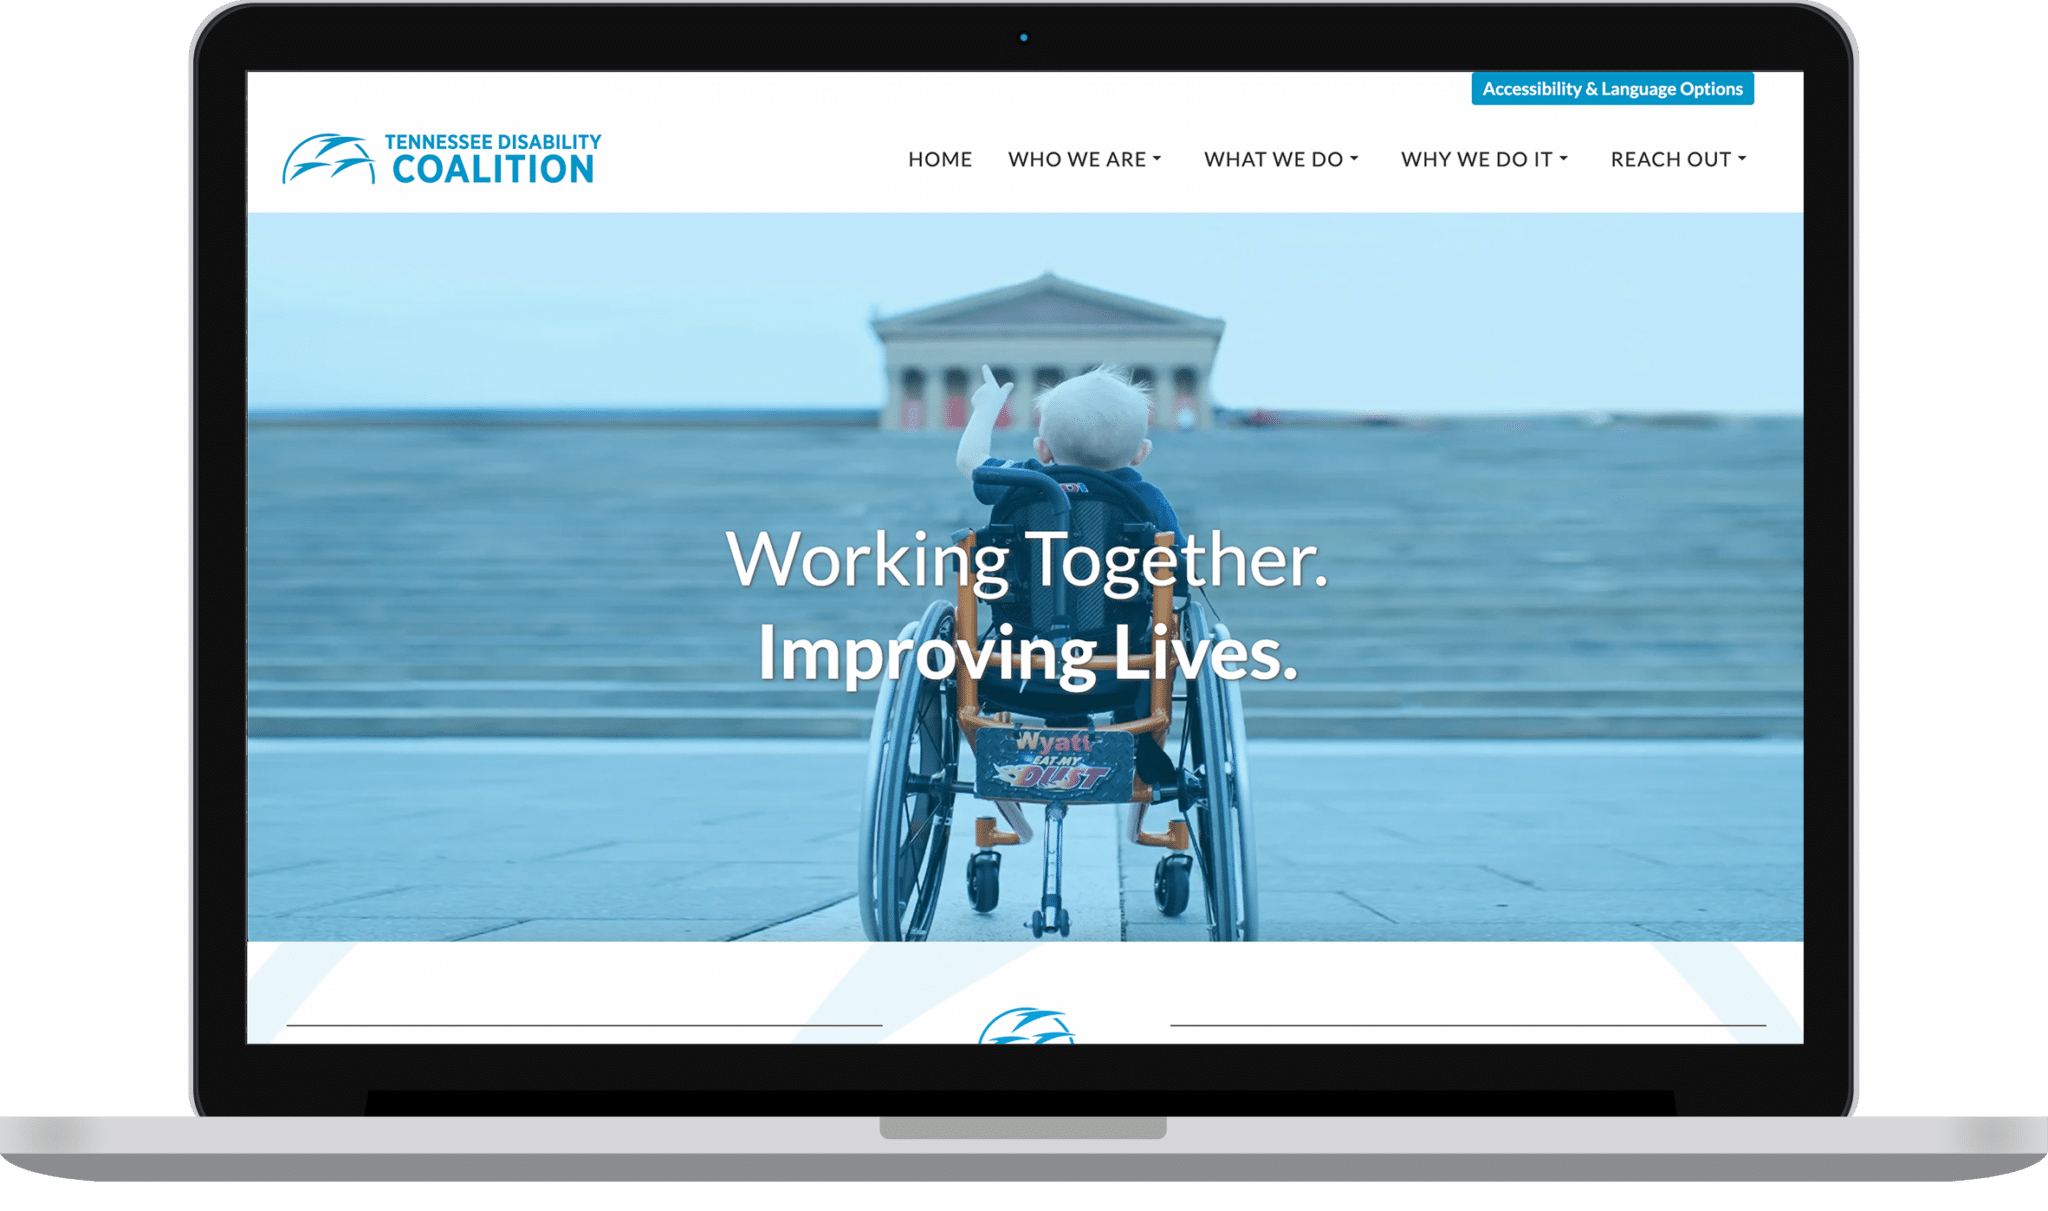 Tennessee Disability Coalition homepage displayed on a laptop screen.